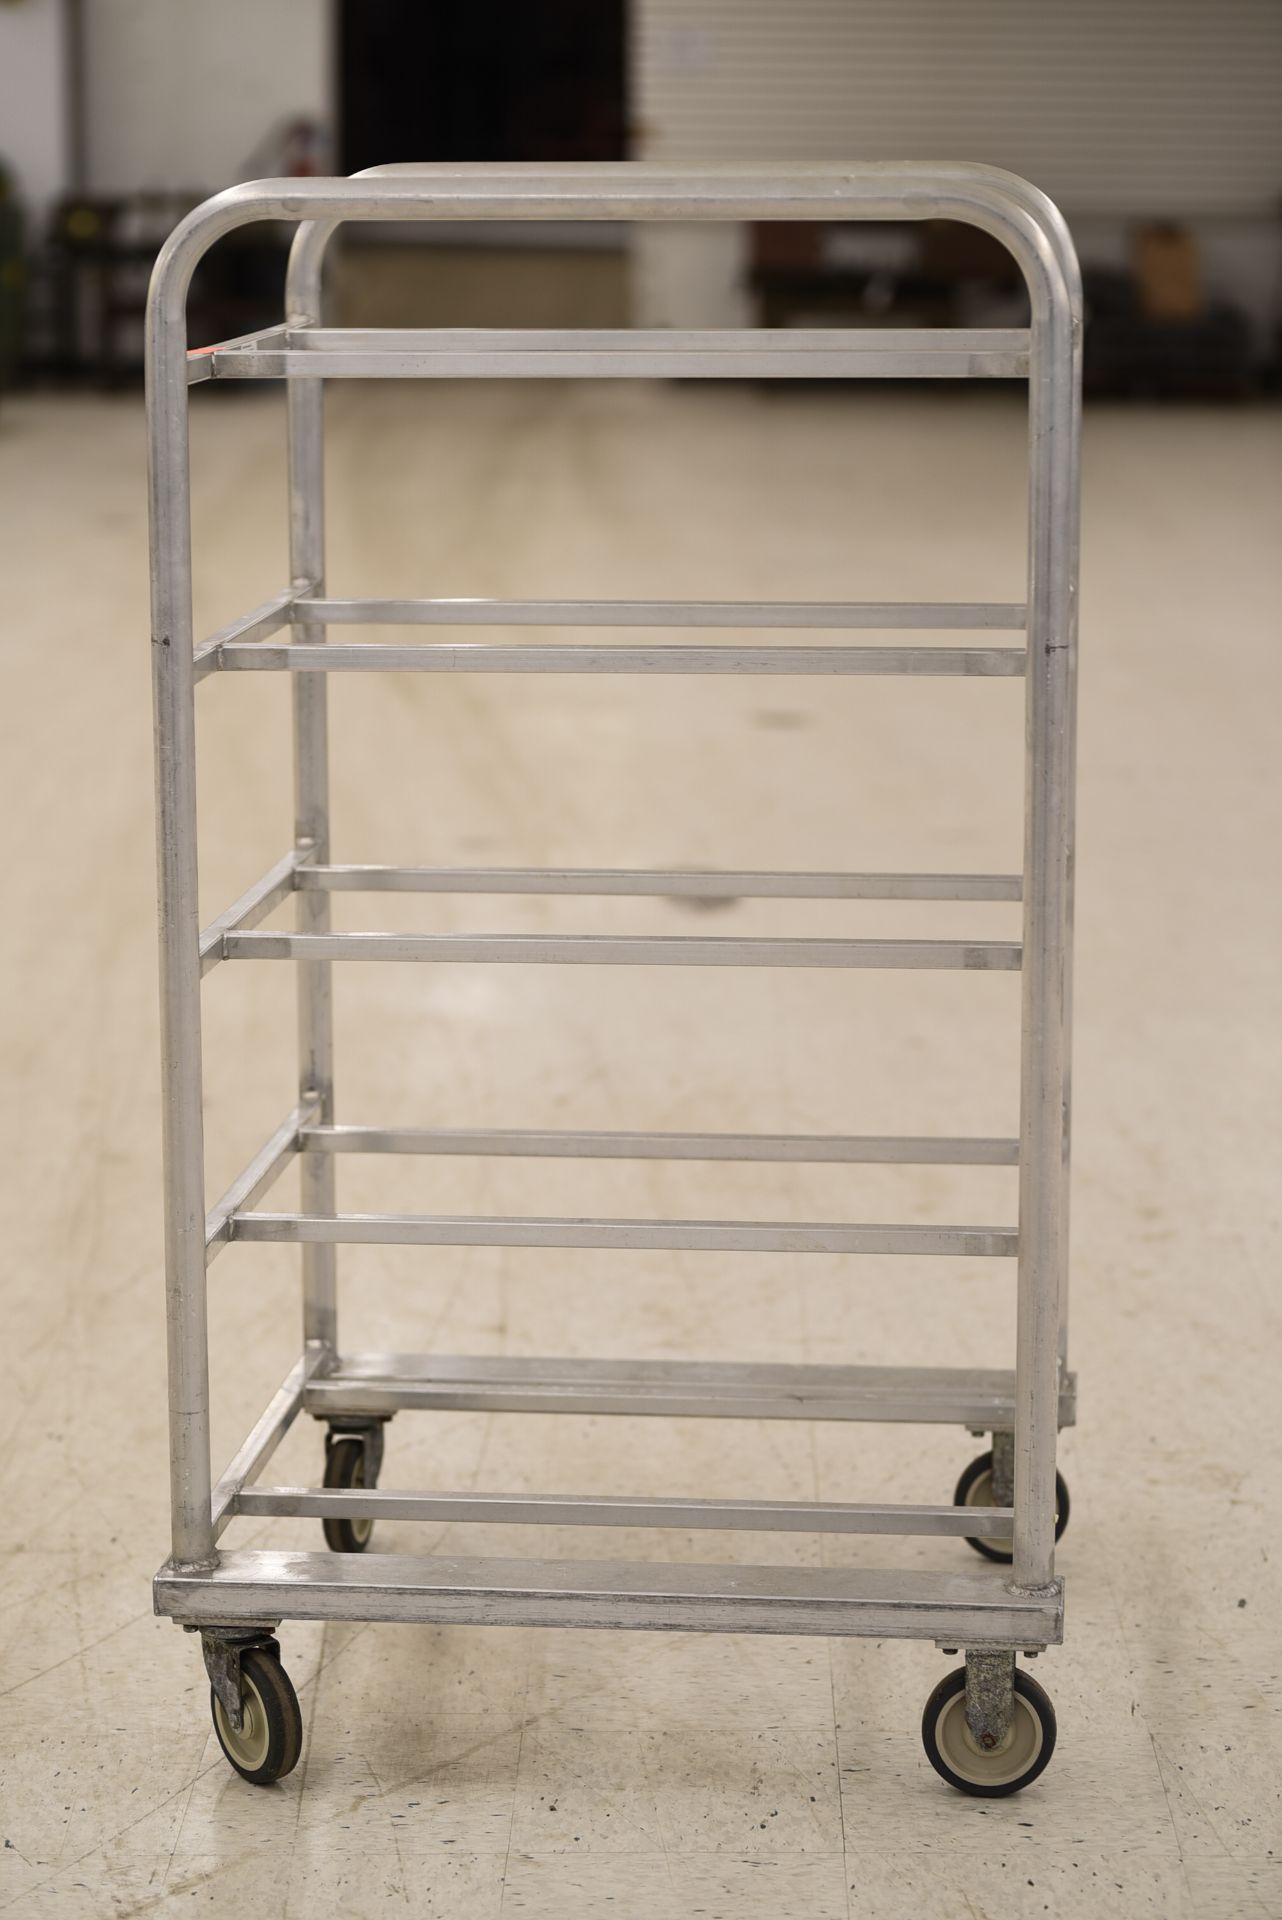 5-Tier Stainless Steel Rolling Lugger Cart - Image 2 of 3